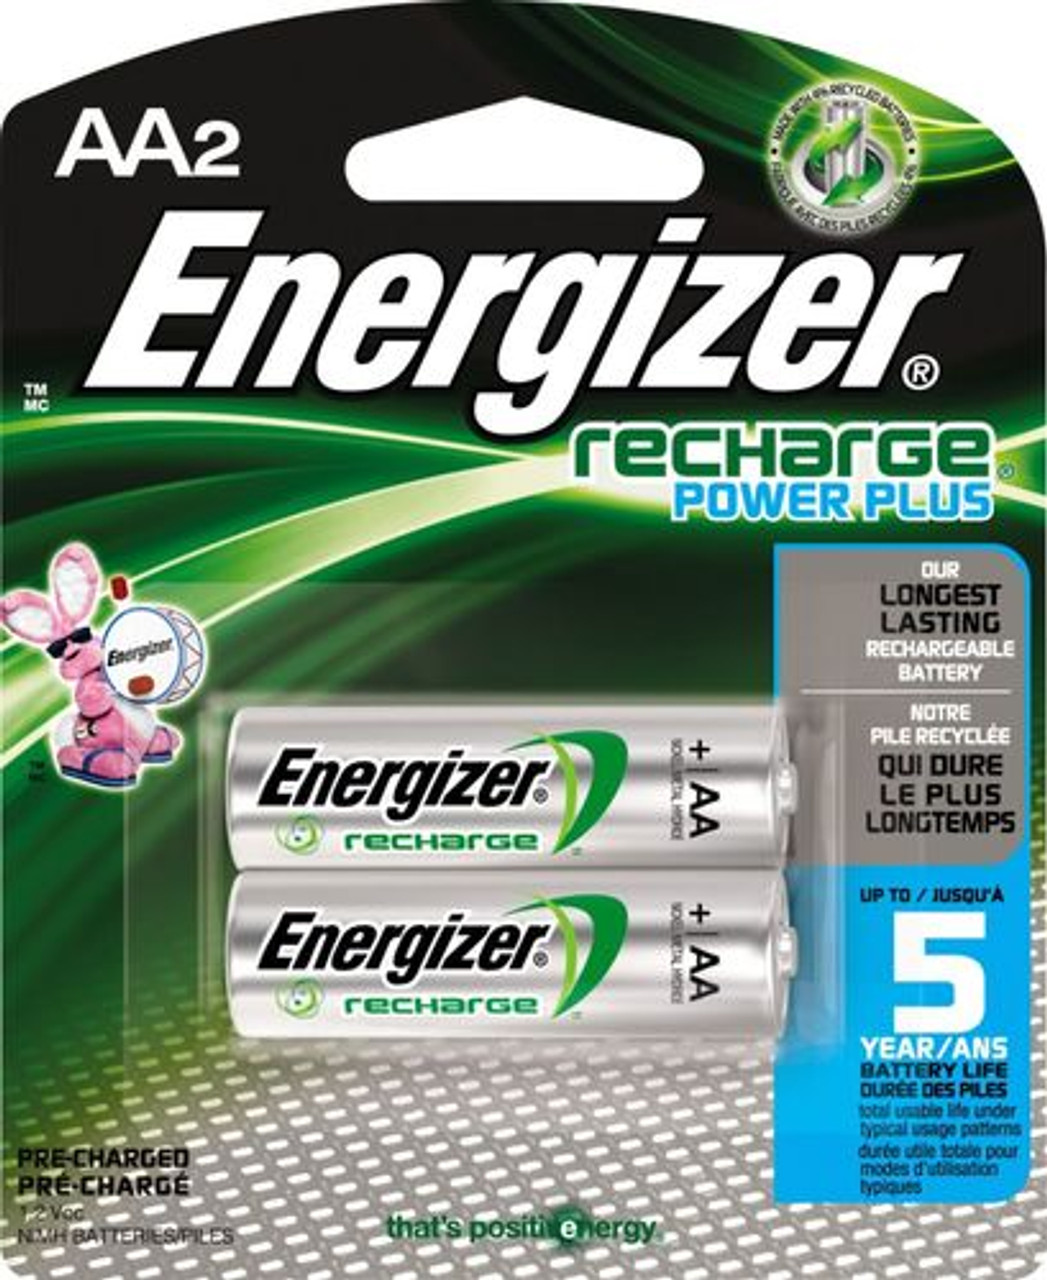 Energizer - Recharge Power Plus Rechargeable AA Batteries (2-Pack)